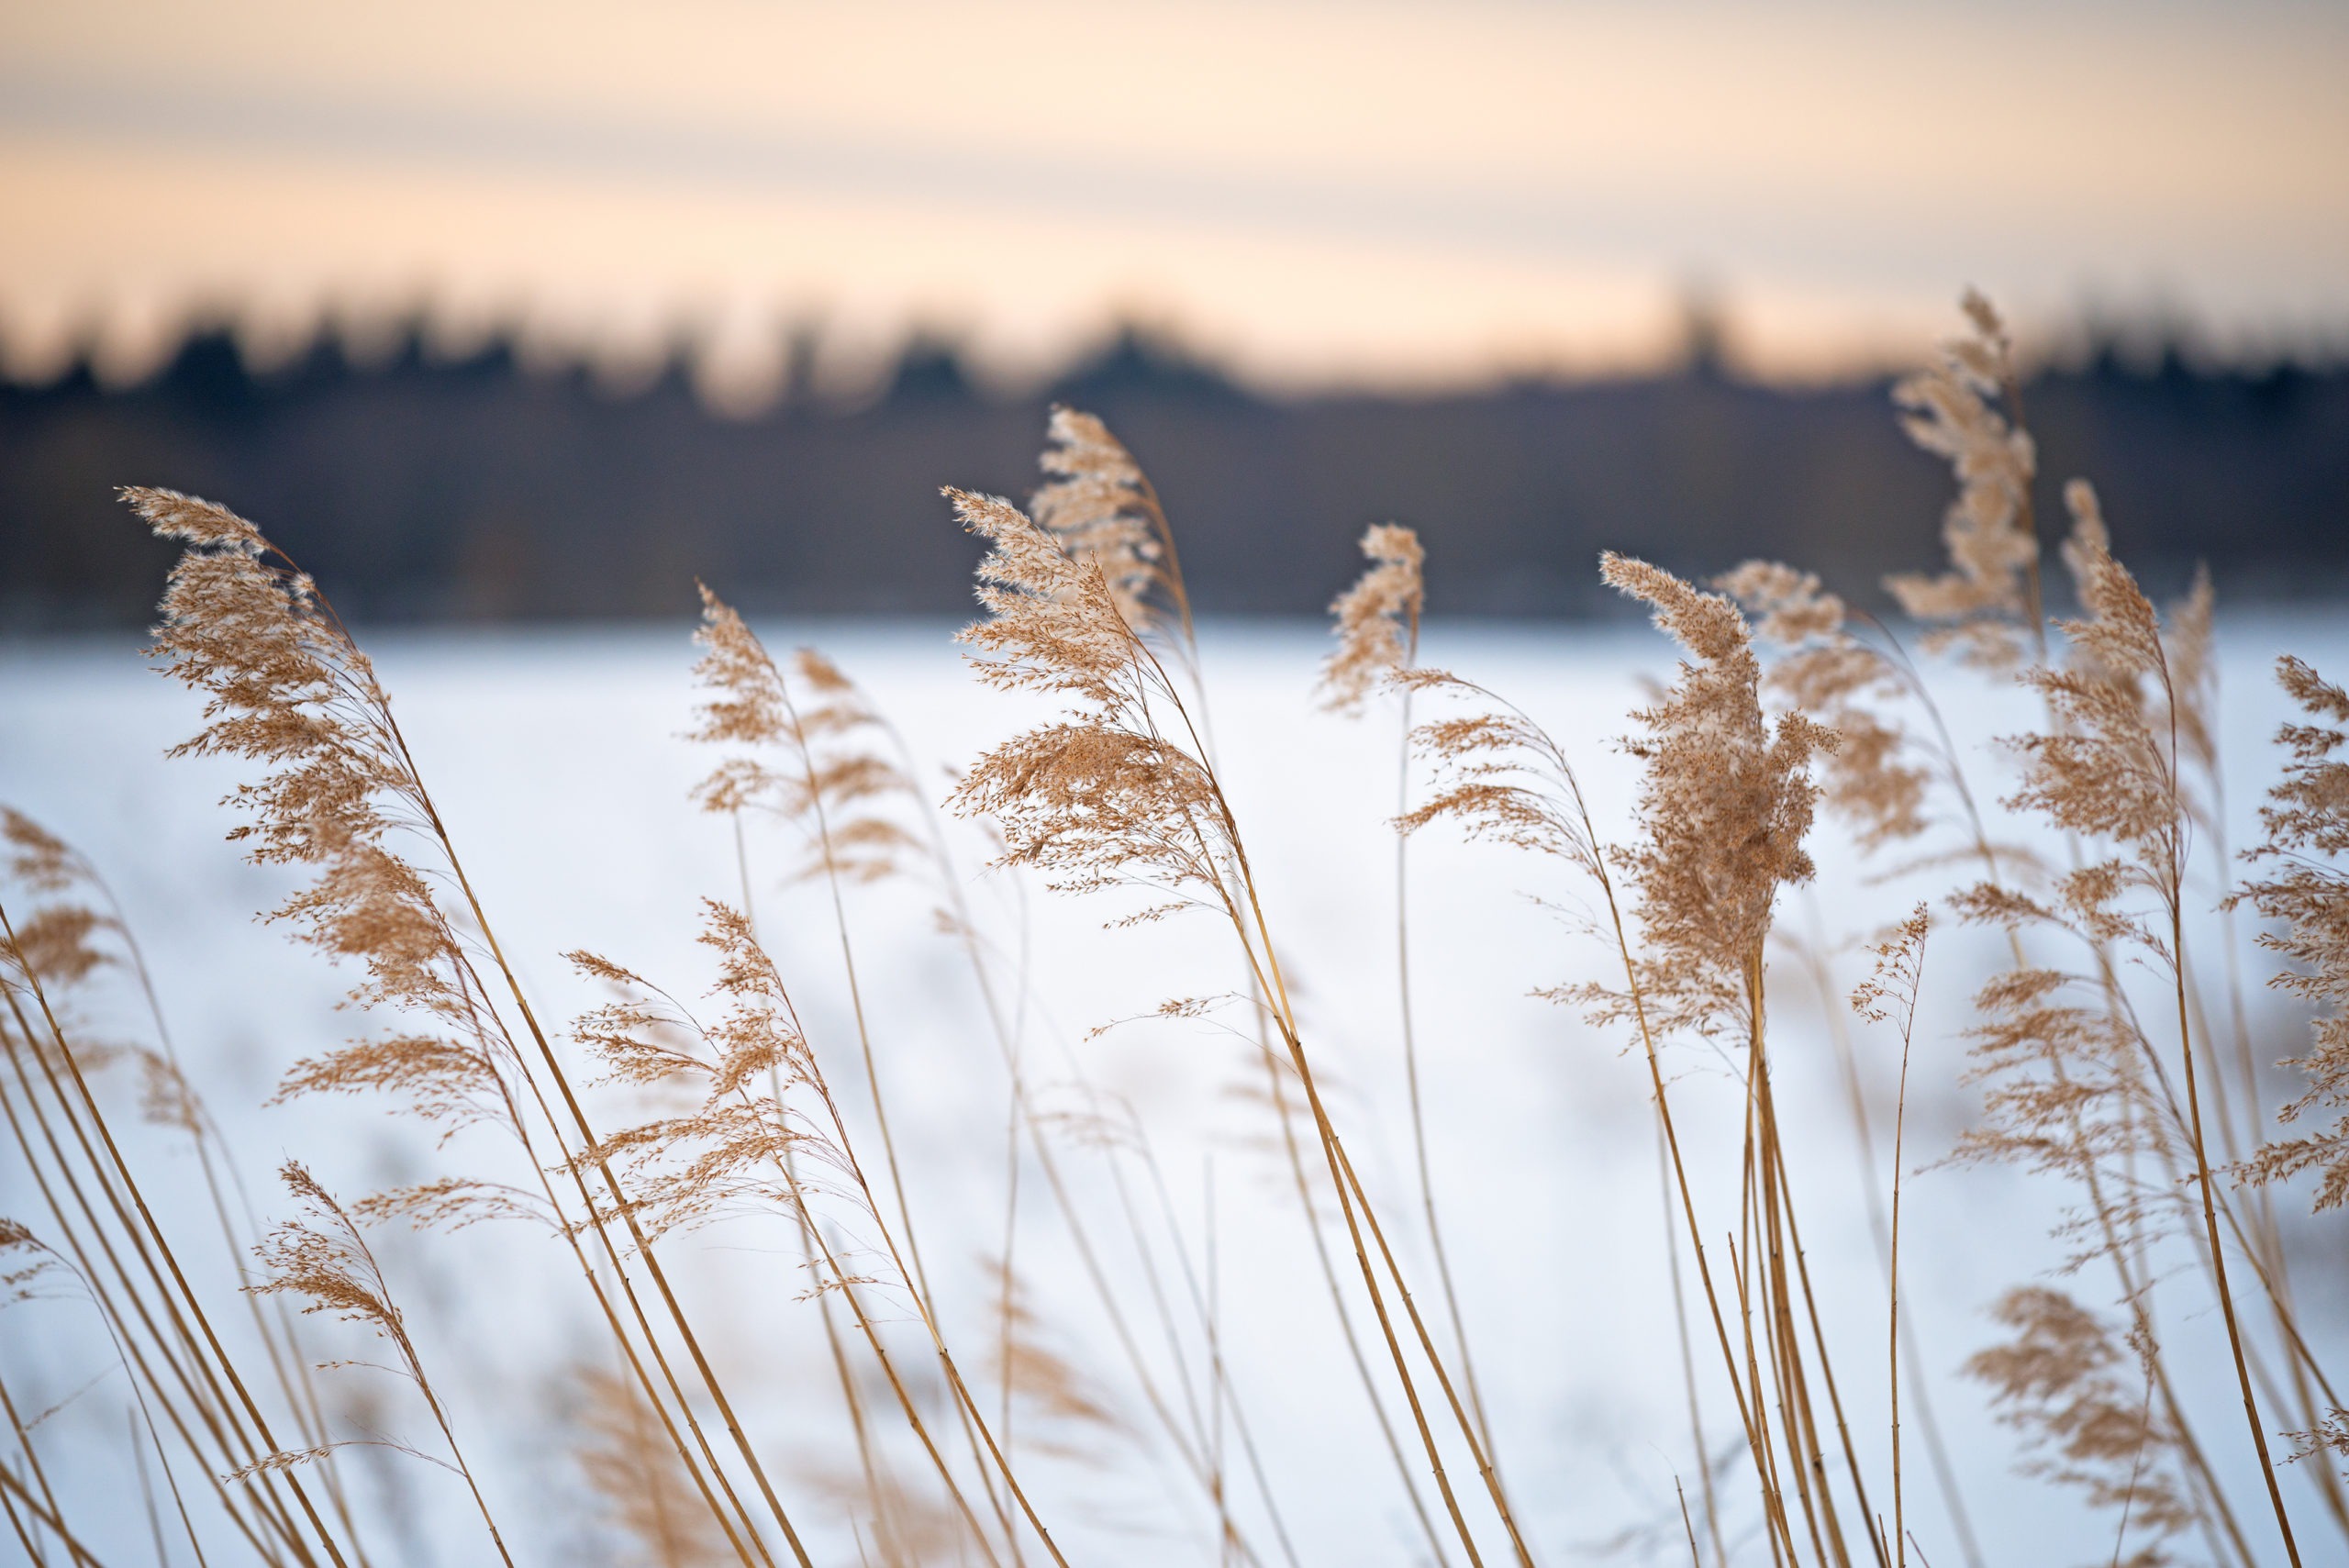 Reed in the wind in the winter landscape of the haiku.